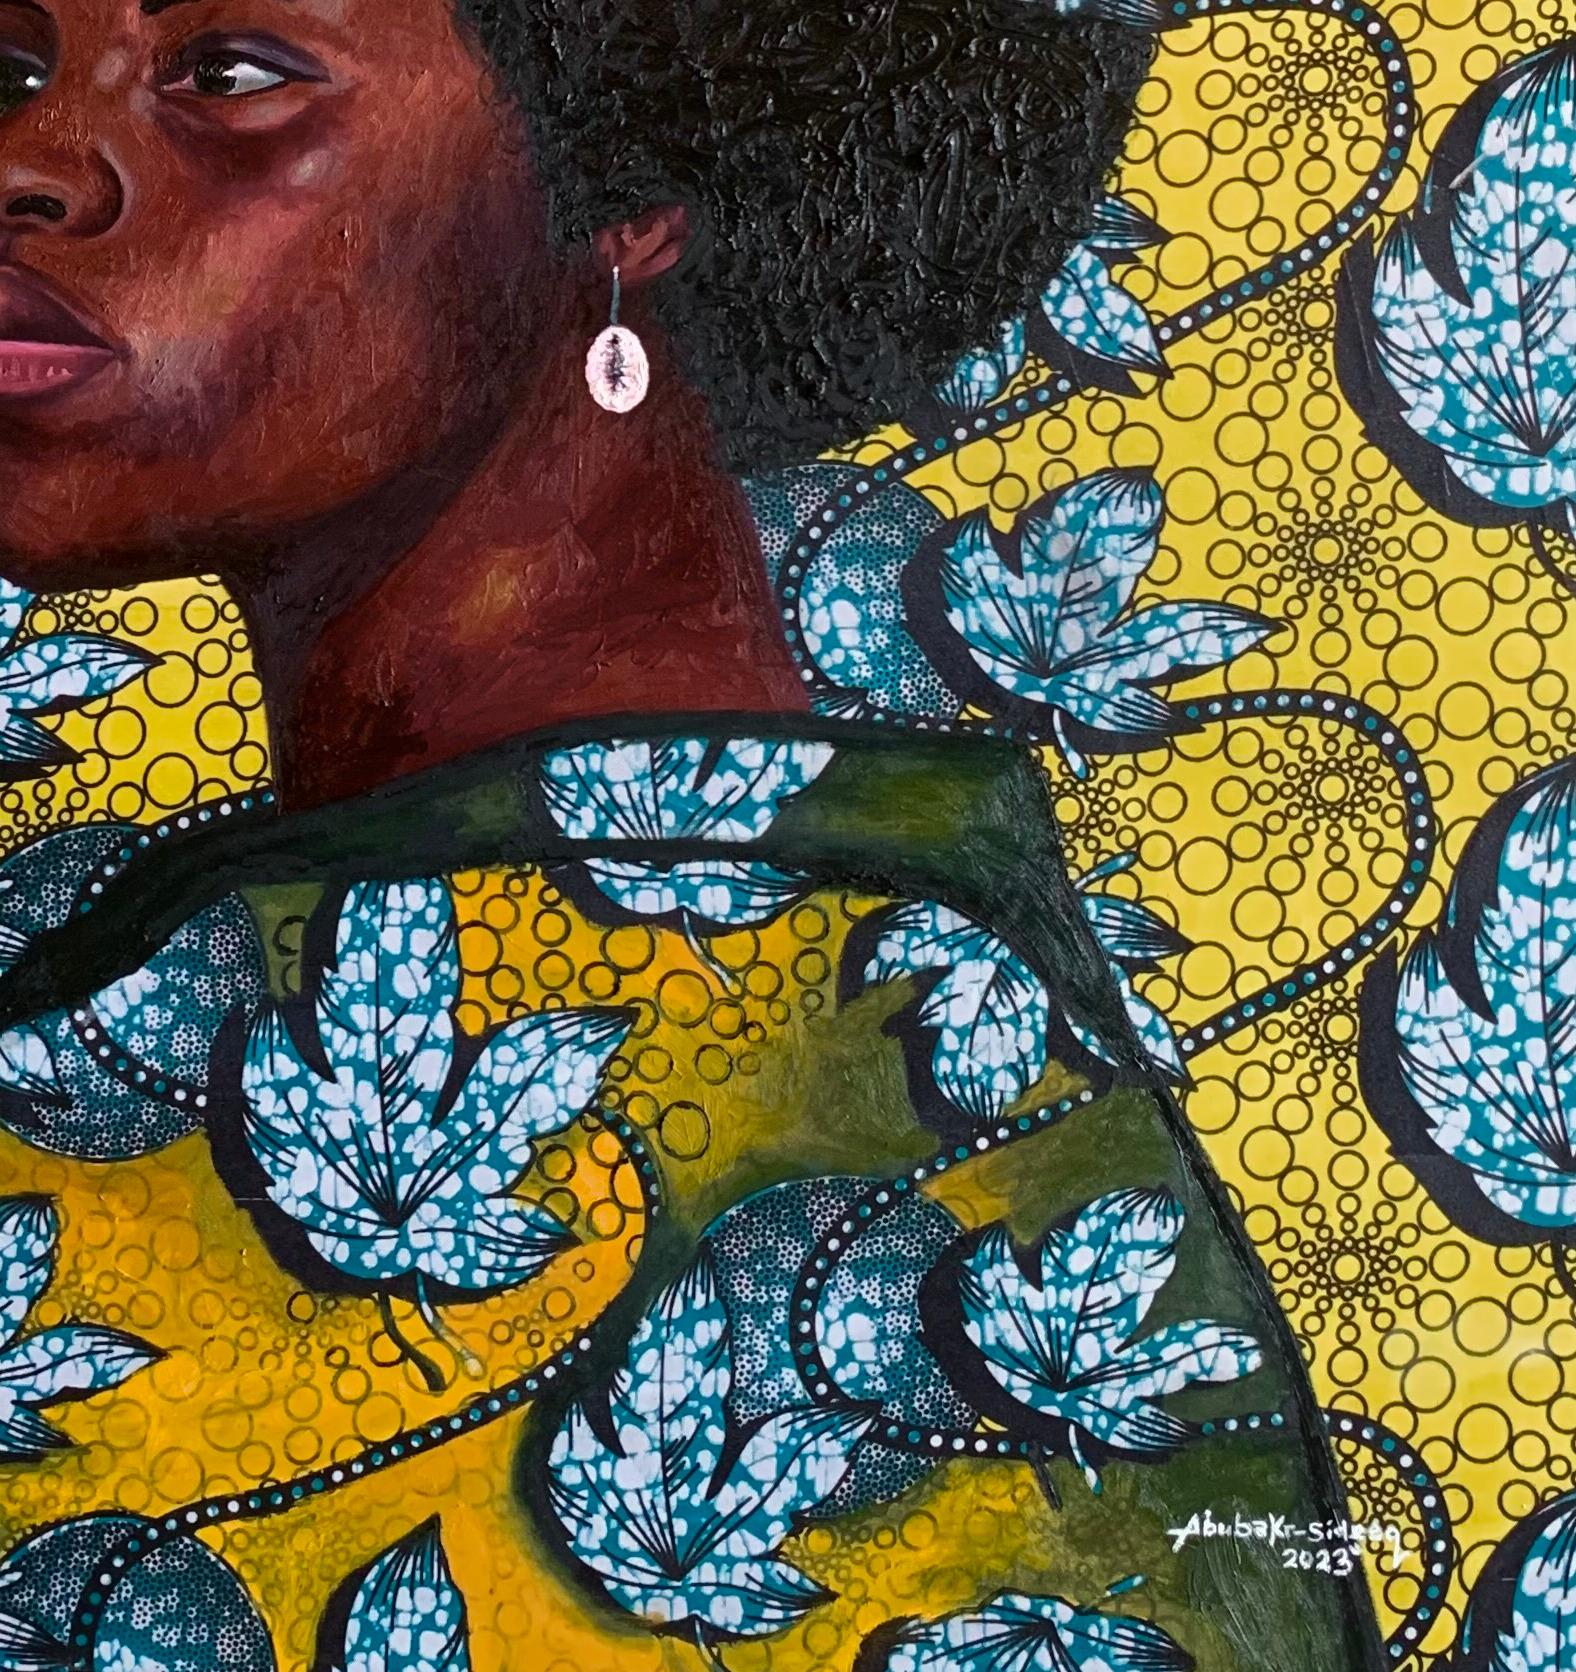 The painting depicts a proud and confident black African woman with her afro hair as her crowning glory. The intricate and detailed portrayal of her features and hair are rendered in rich, warm hues using oil on Ankara fabric. The vibrant colors and